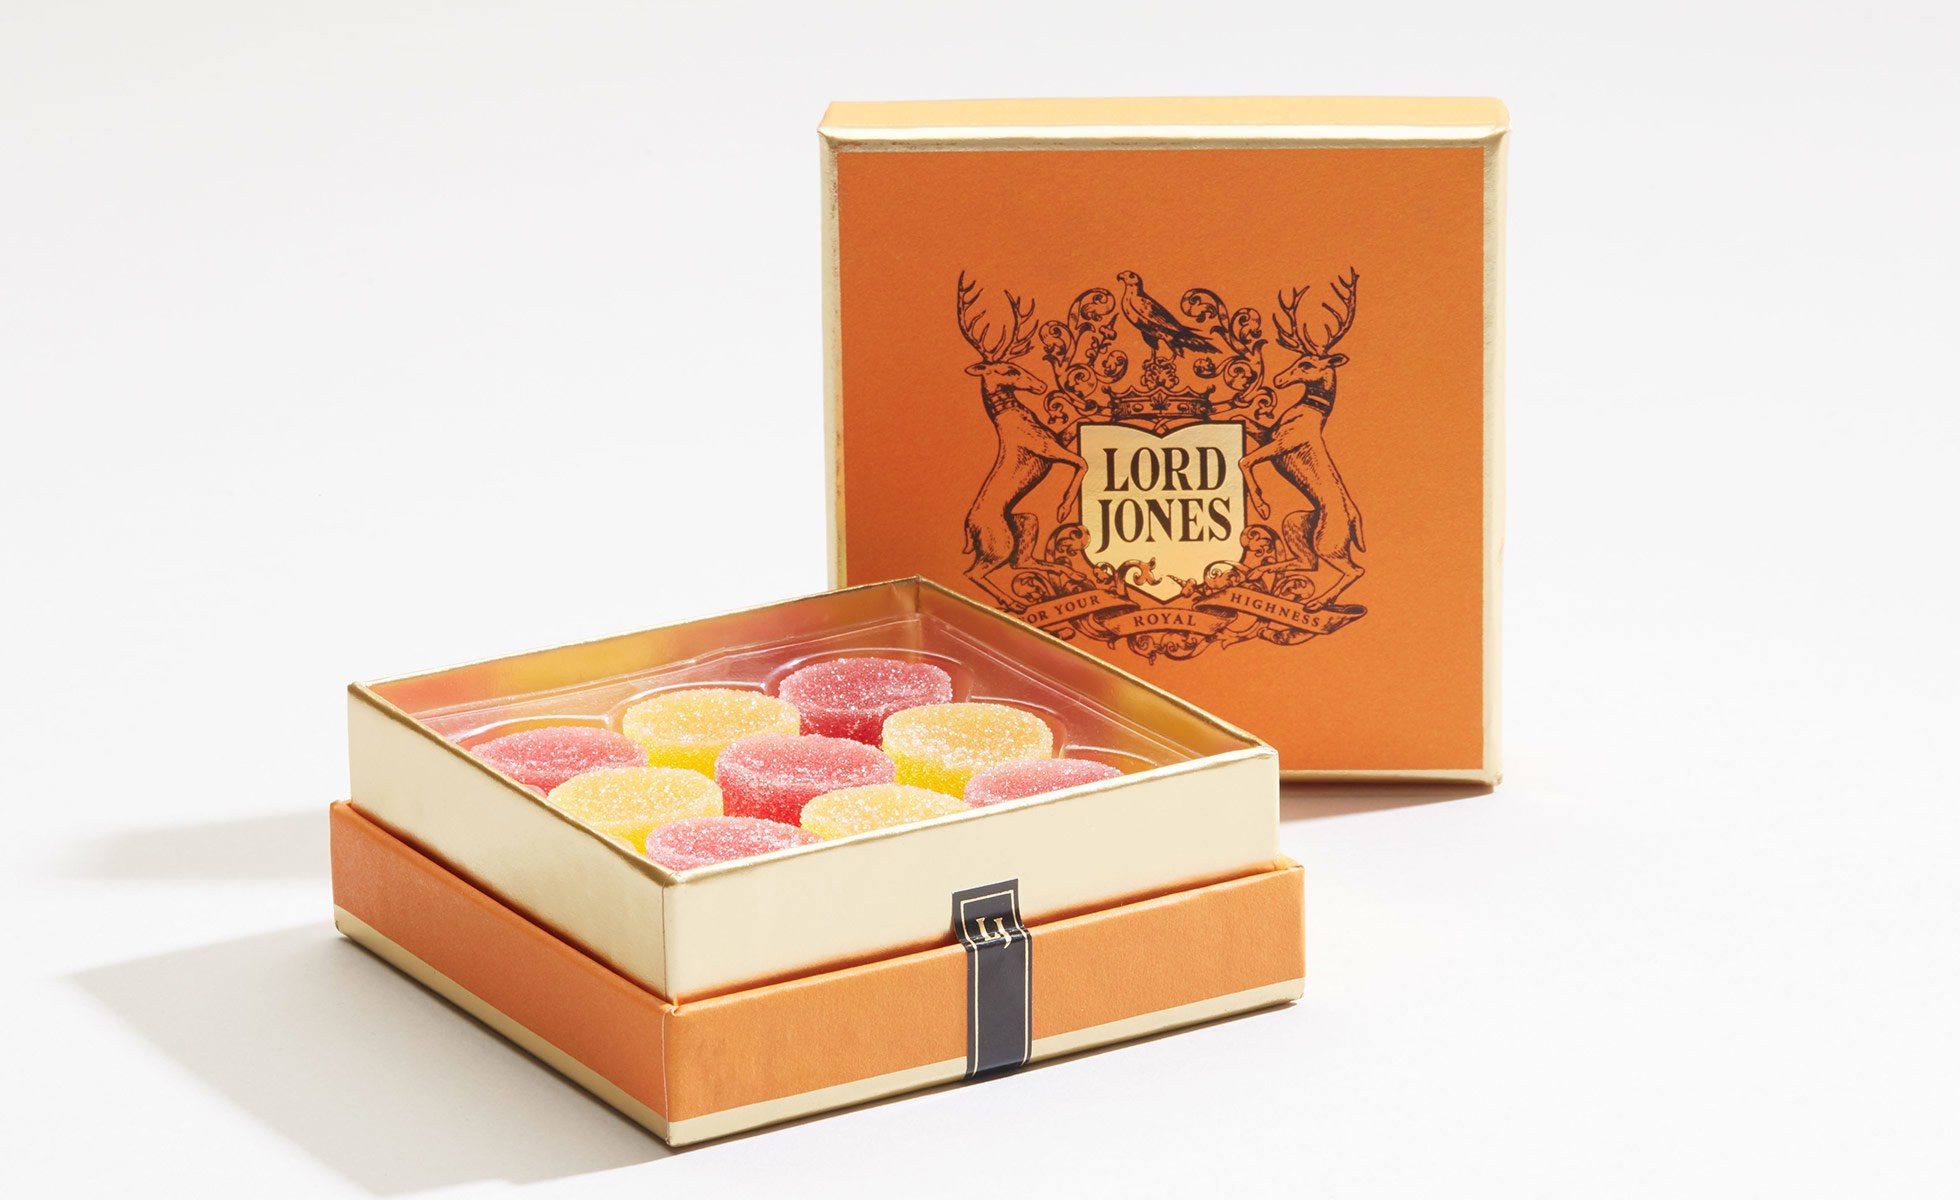 Lord Jones' Limited Edition All Natural Valentine's Day Gumdrops